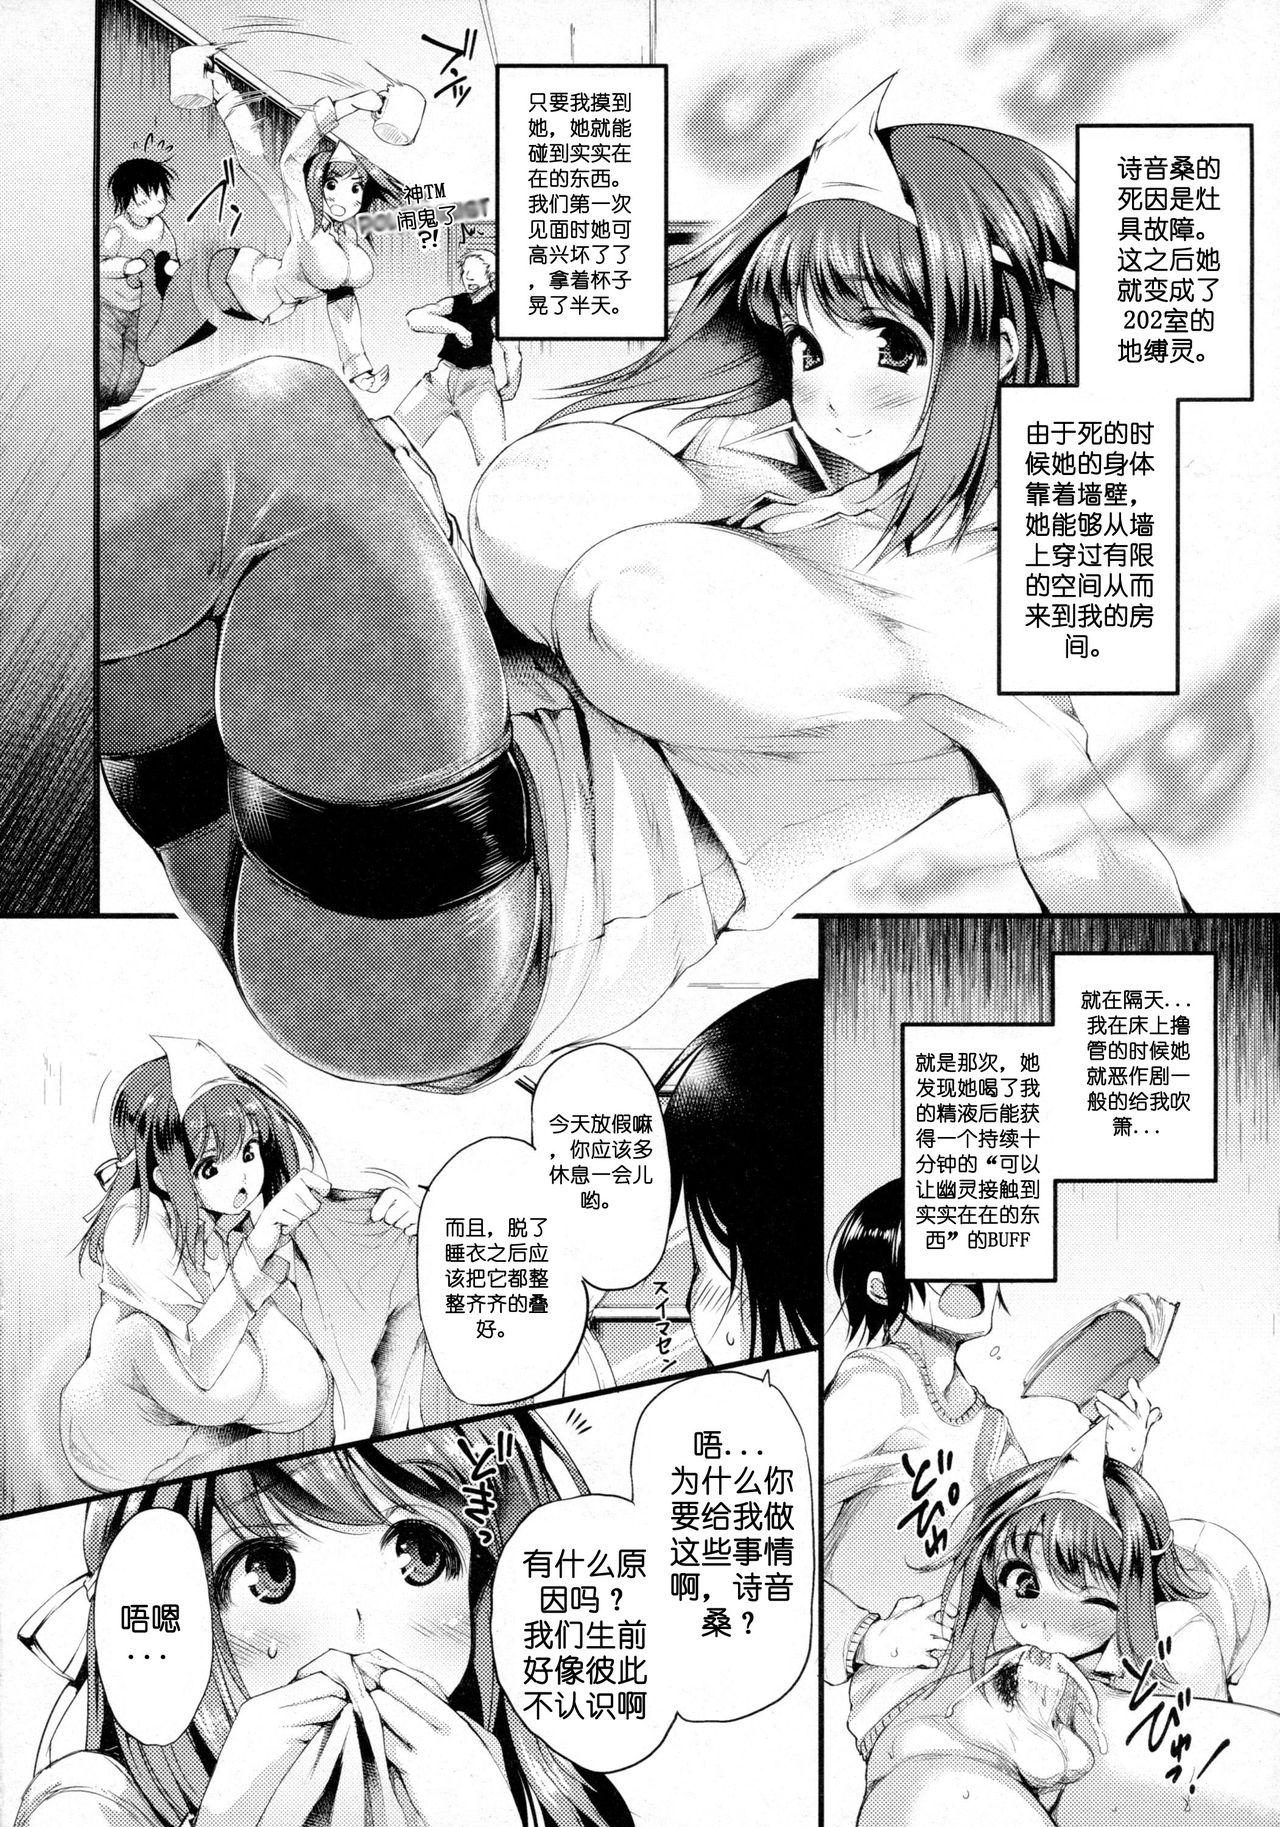 Peituda [Oohira Sunset] 202-Goushitsu no Yuurei-san | The Ghost in Room 202 (COMIC Unreal 2016-02 Vol. 59) [Chinese] [简称天子个人汉化] (Ongoing) Titties - Page 2